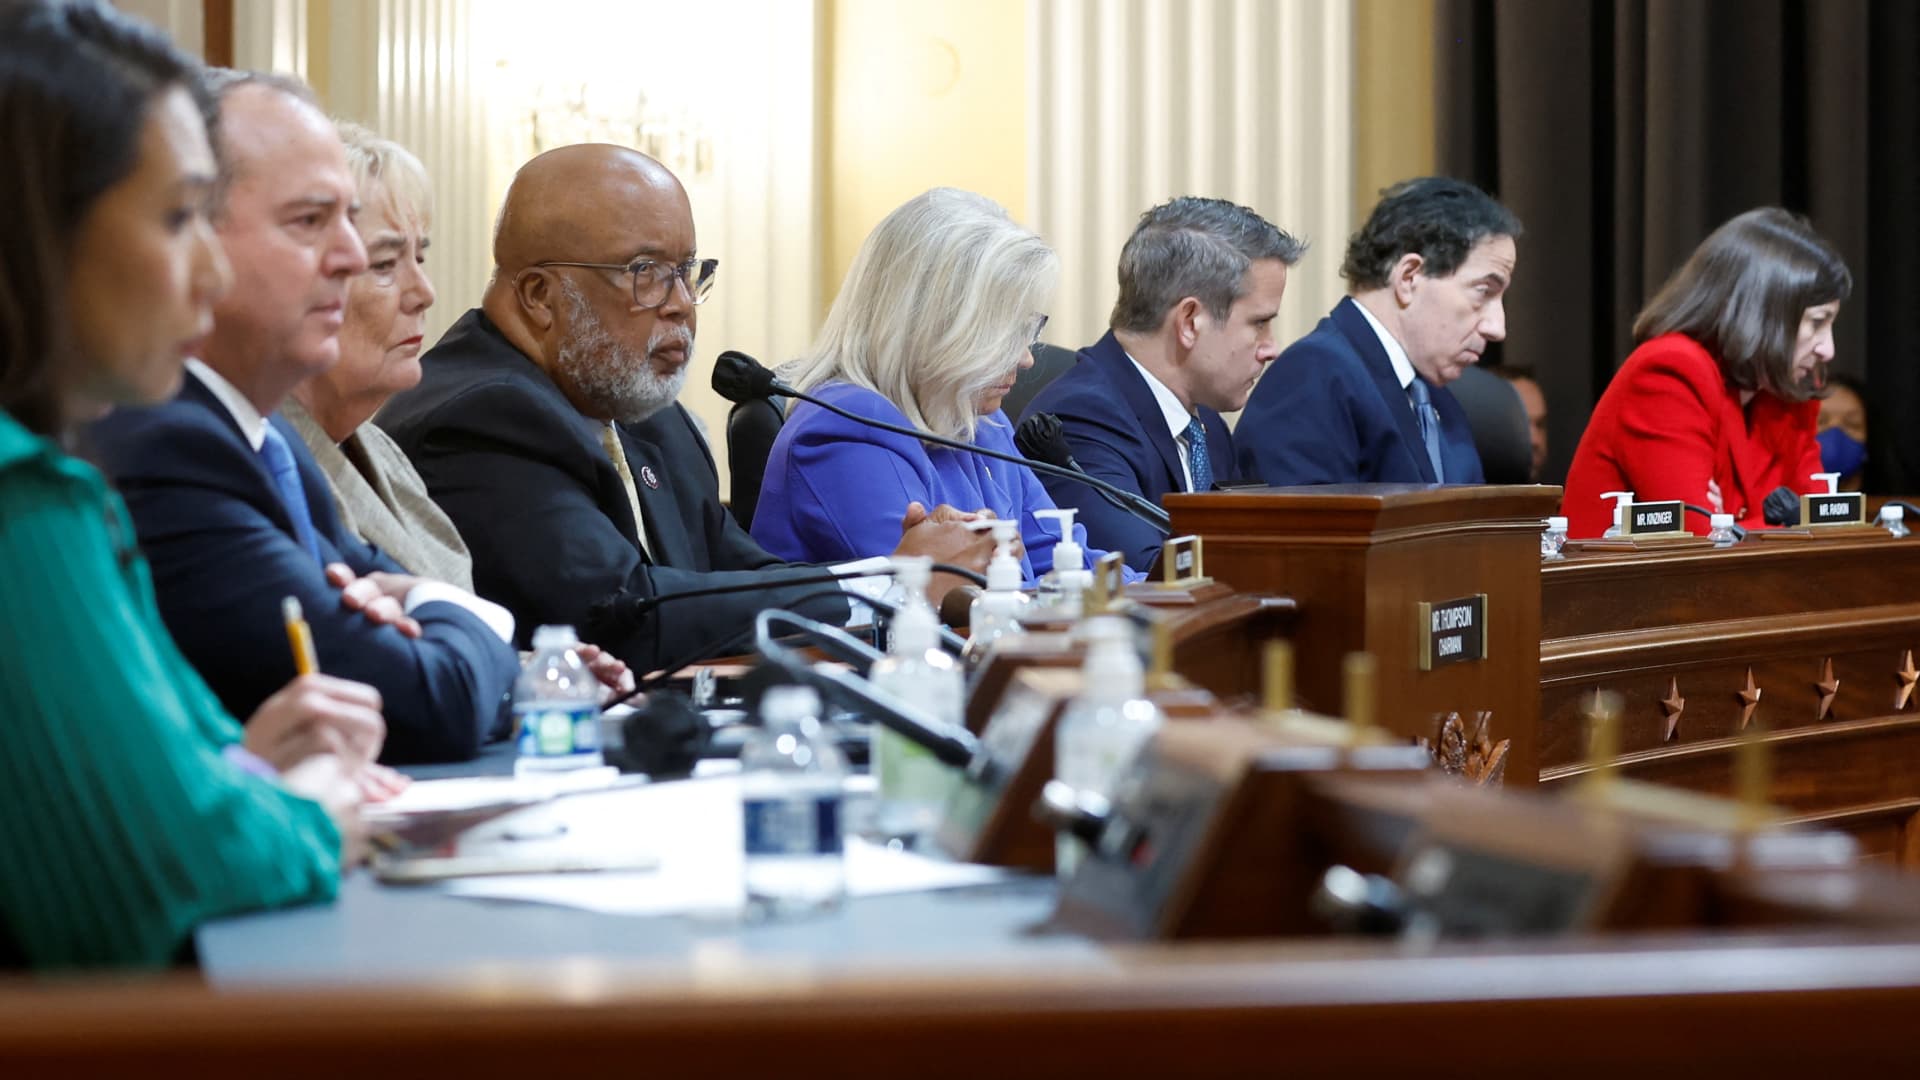 Jan. 6 Capitol riot committee members are tightlipped on what to expect in this week’s hearings